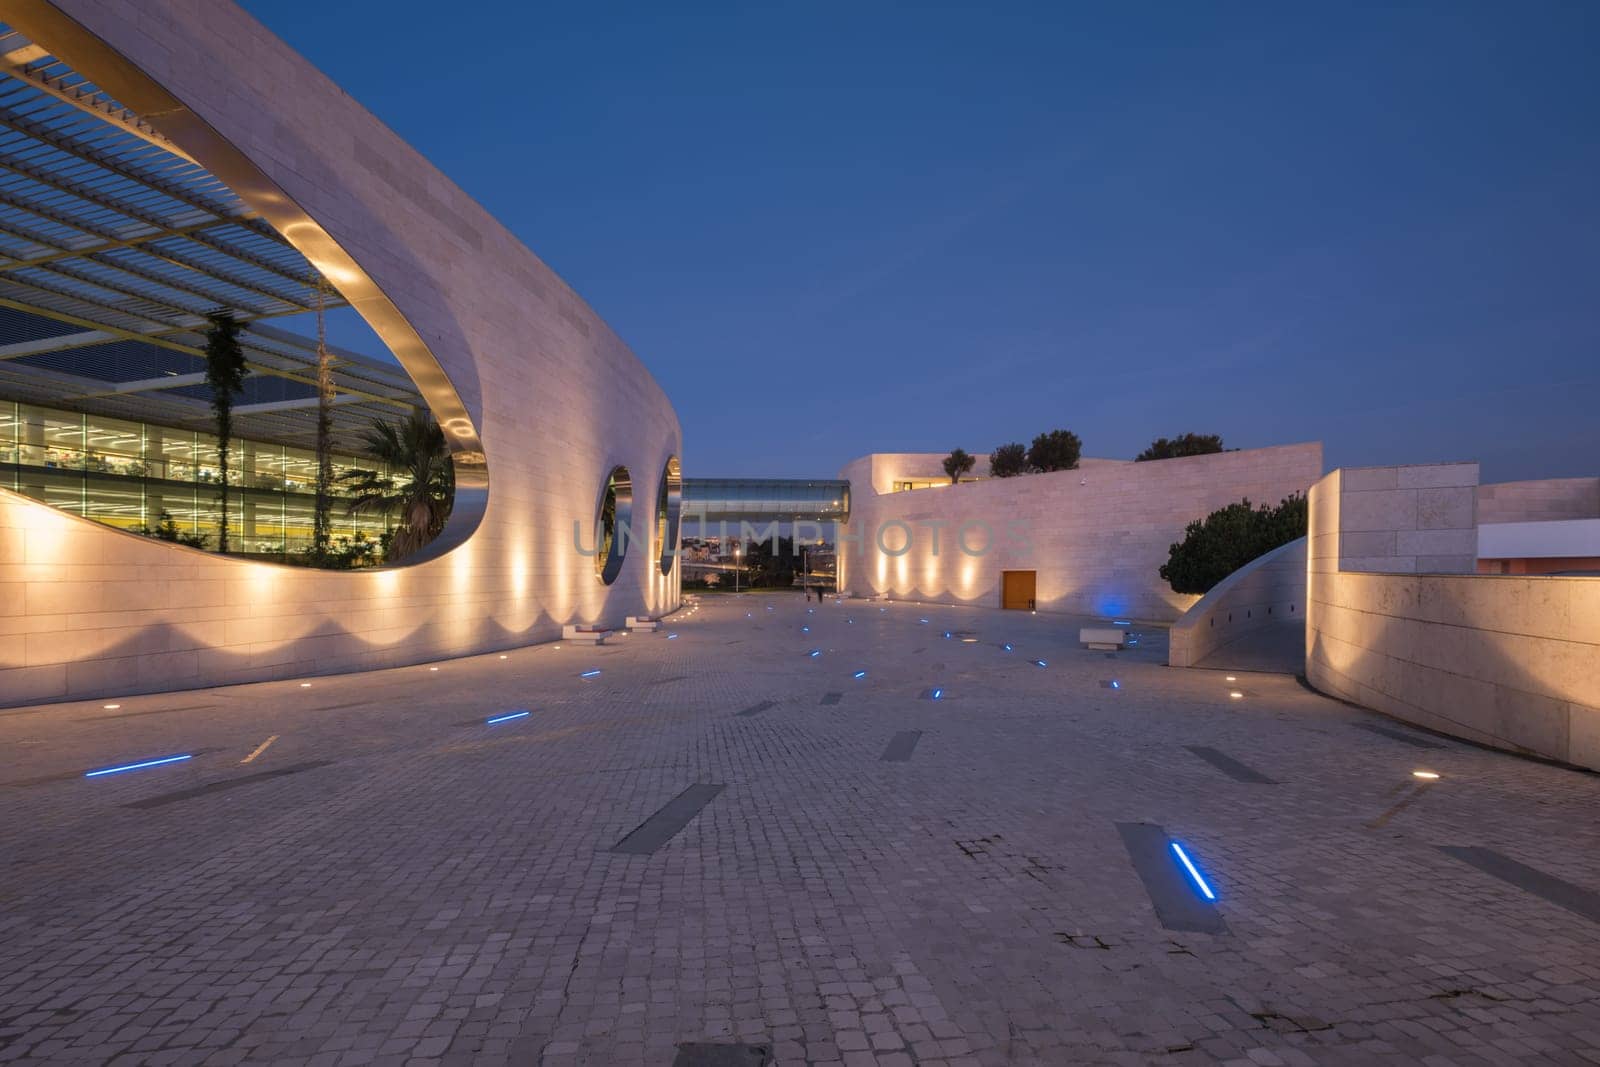 Lisbon, Portugal - January 13, 2023: Modern architecture of the Champalimaud foundation building - Portuguese non-profit foundation for scientific medical research in Belem illuminated in night time